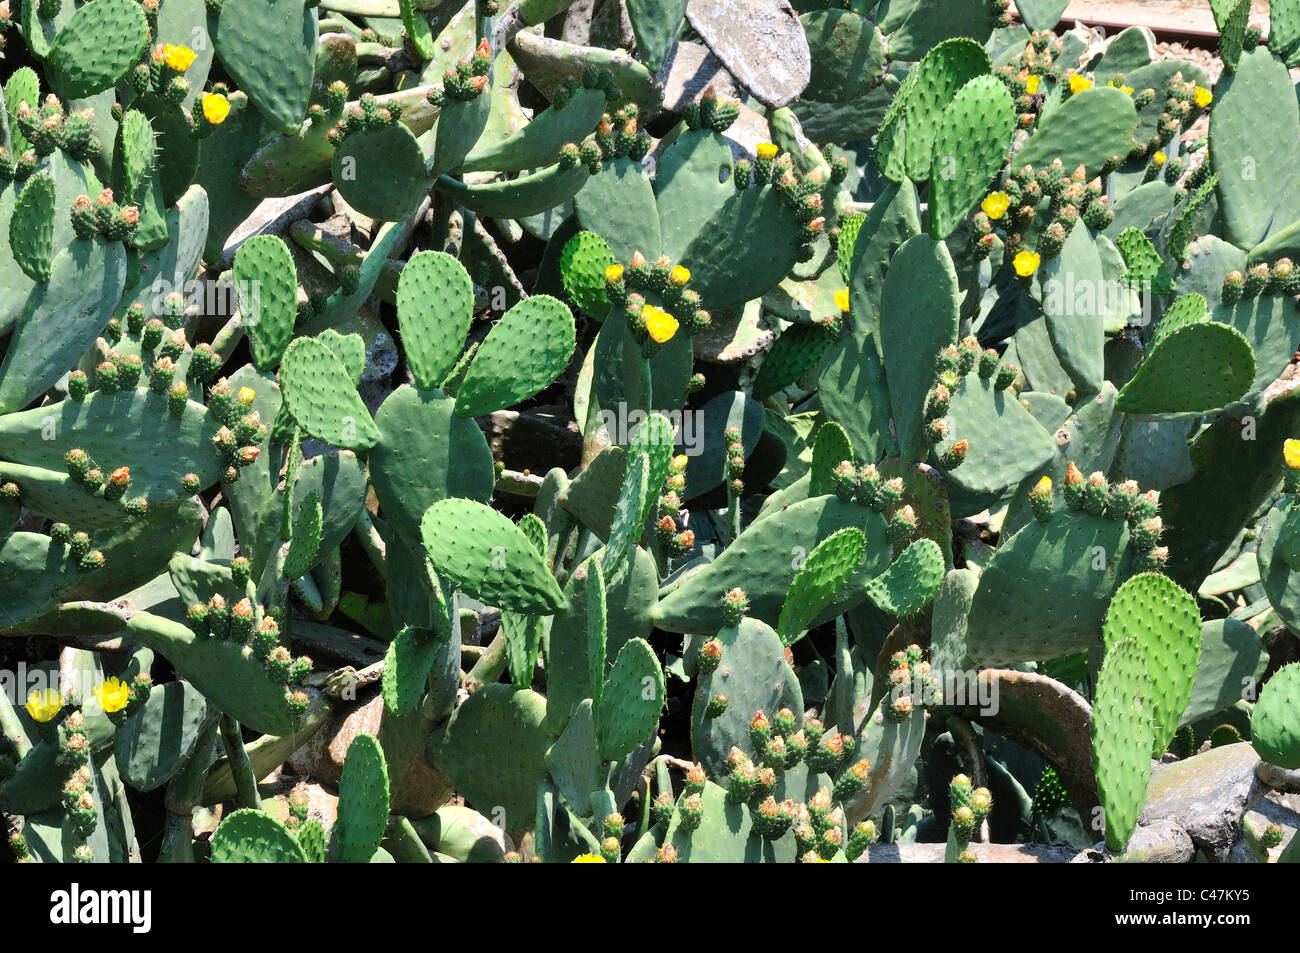 Prickly pears (opuntia) or Nopal, a cactus with yellow flowers and edible fruit - Palau, north Sardinia, Italy Stock Photo